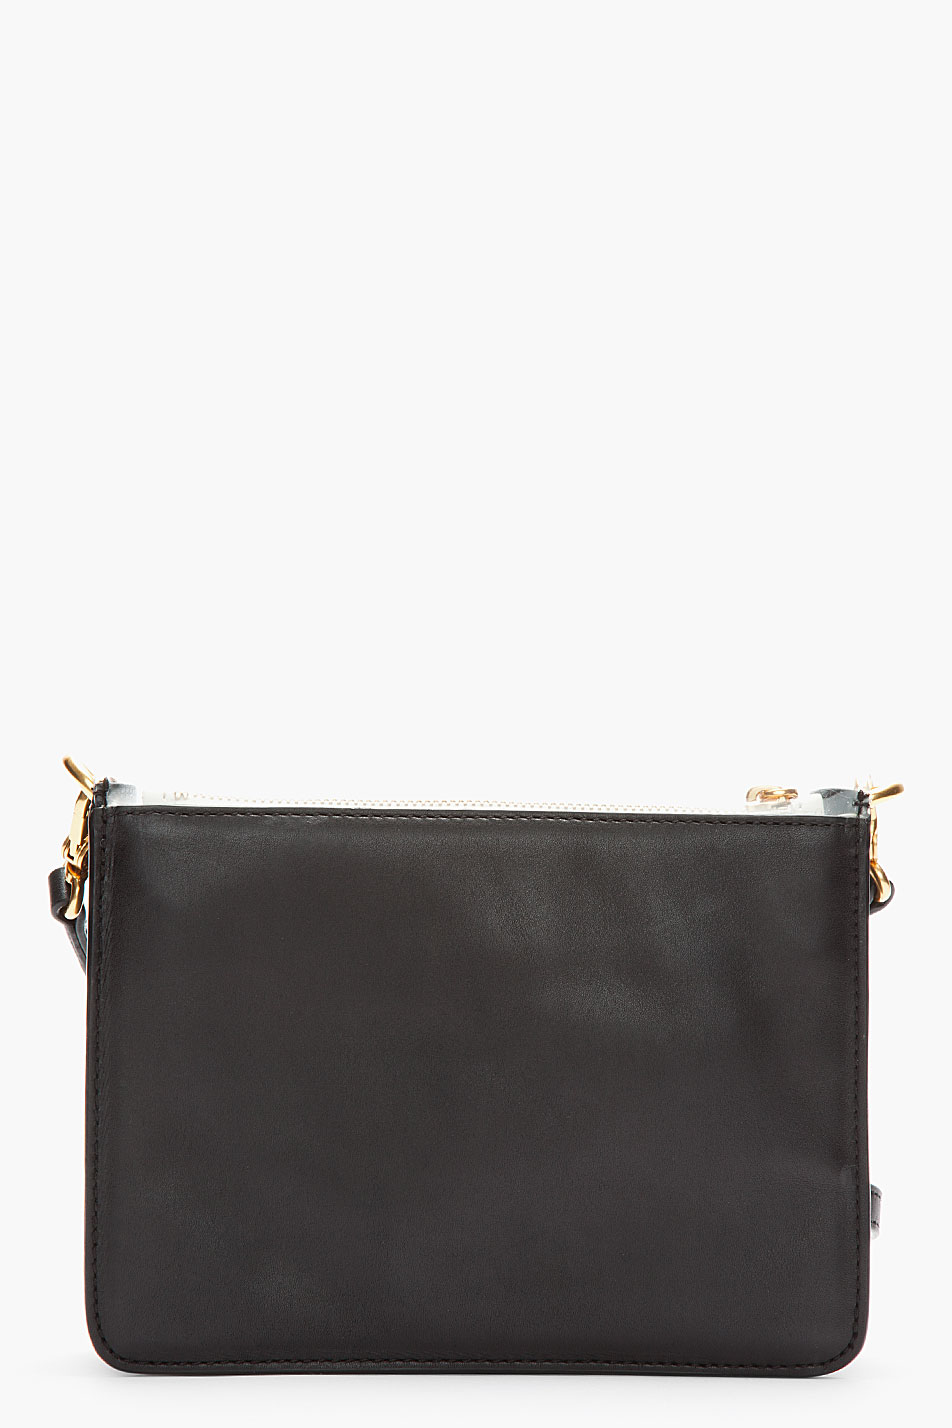 Lyst - Marc by marc jacobs Black Cross Body Clearly Colorblocked ...